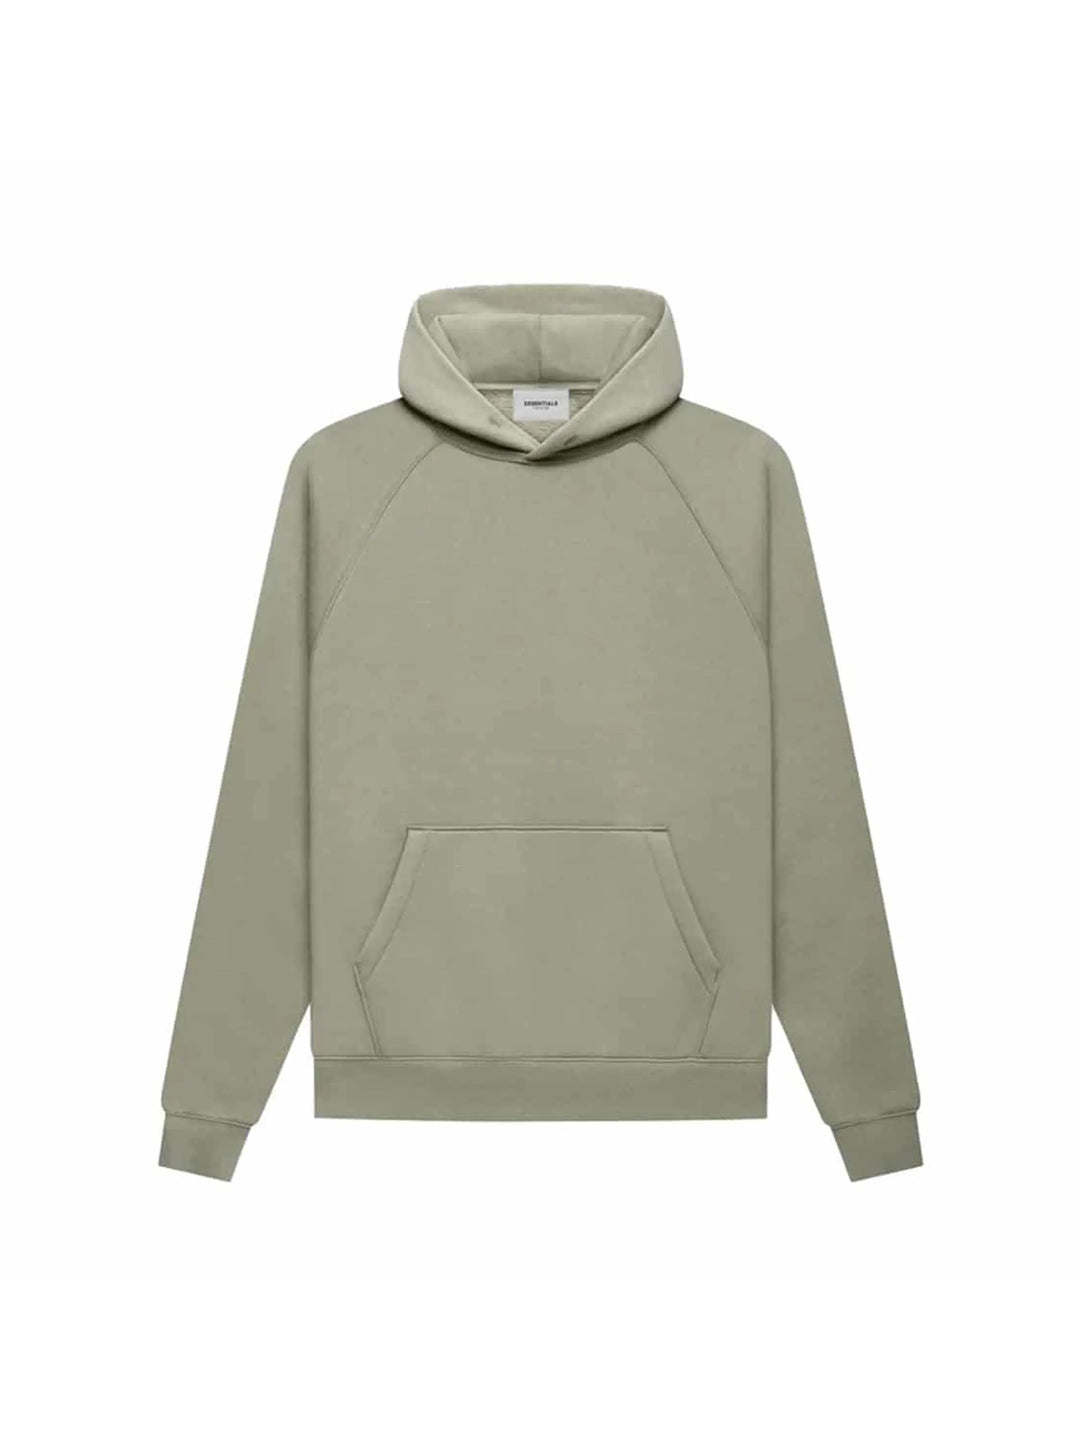 Fear of God Essentials Pullover Hoodie Pistachio in Auckland, New Zealand - Shop name